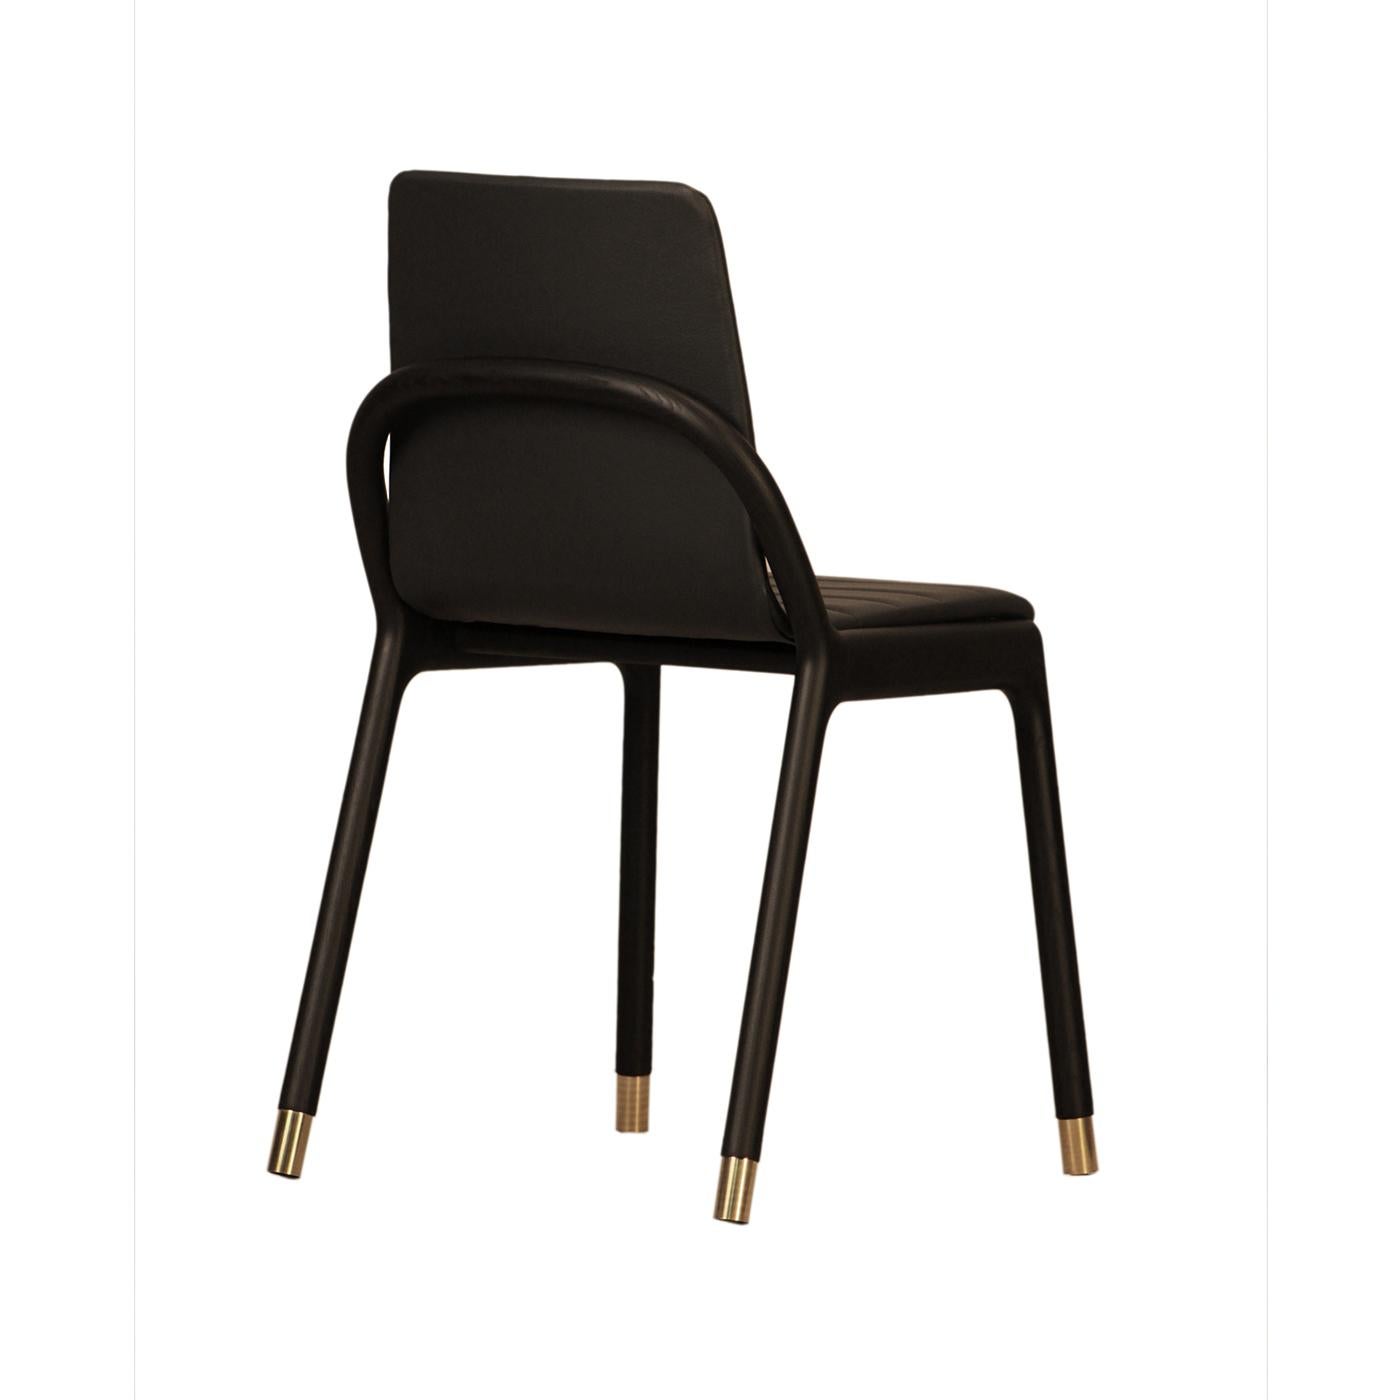 A skillful balance of straight and curved lines distinguishes the sophisticated design of this chair. The ash frame showcases a black finish and features slightly inclined legs. Great comfort is offered by the padding of seat and backrest,